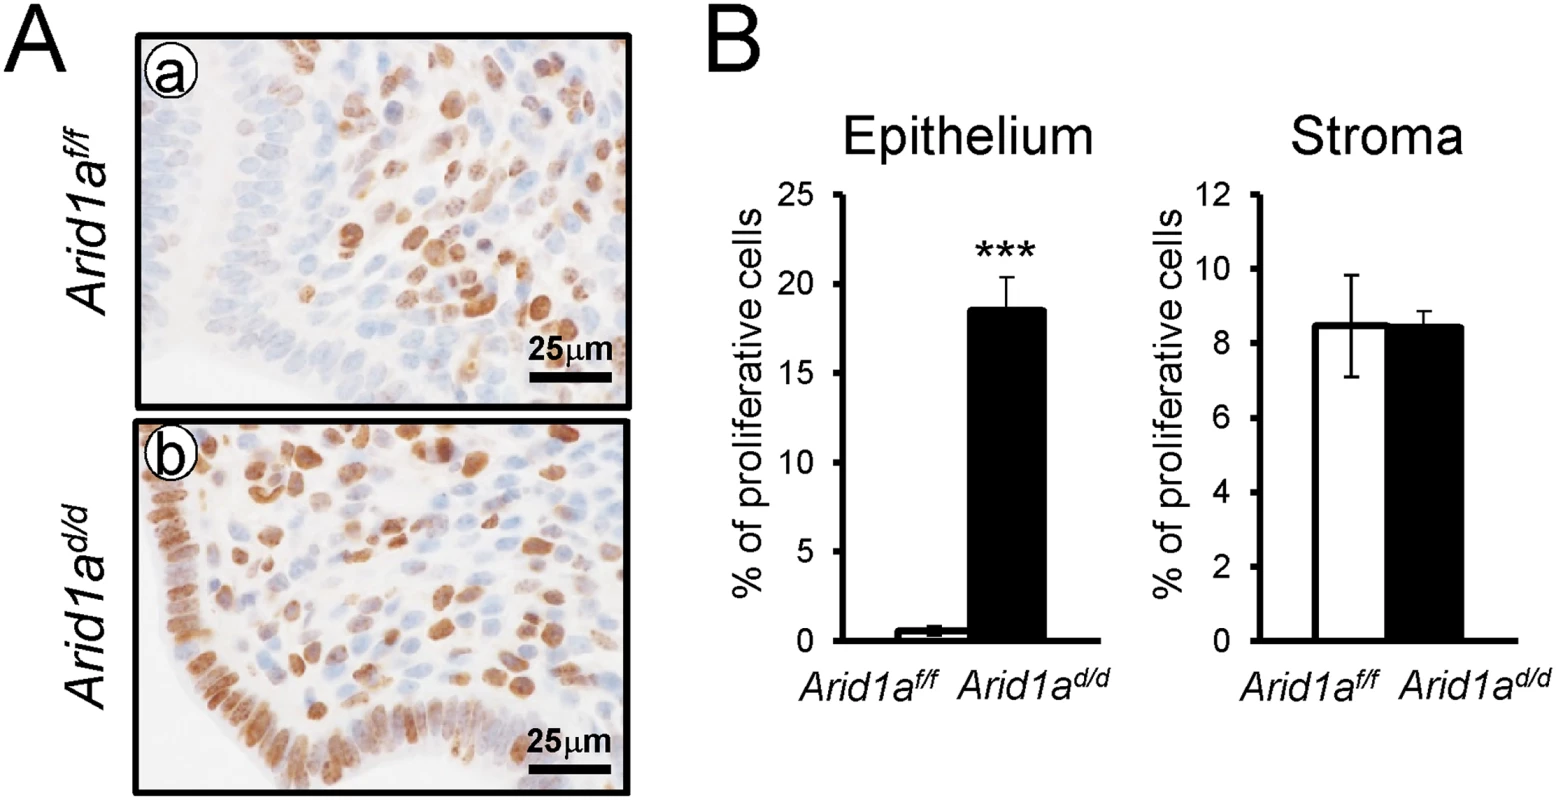 The epithelial proliferation is highly increased in <i>Arid1a</i><sup><i>d/d</i></sup> mice.